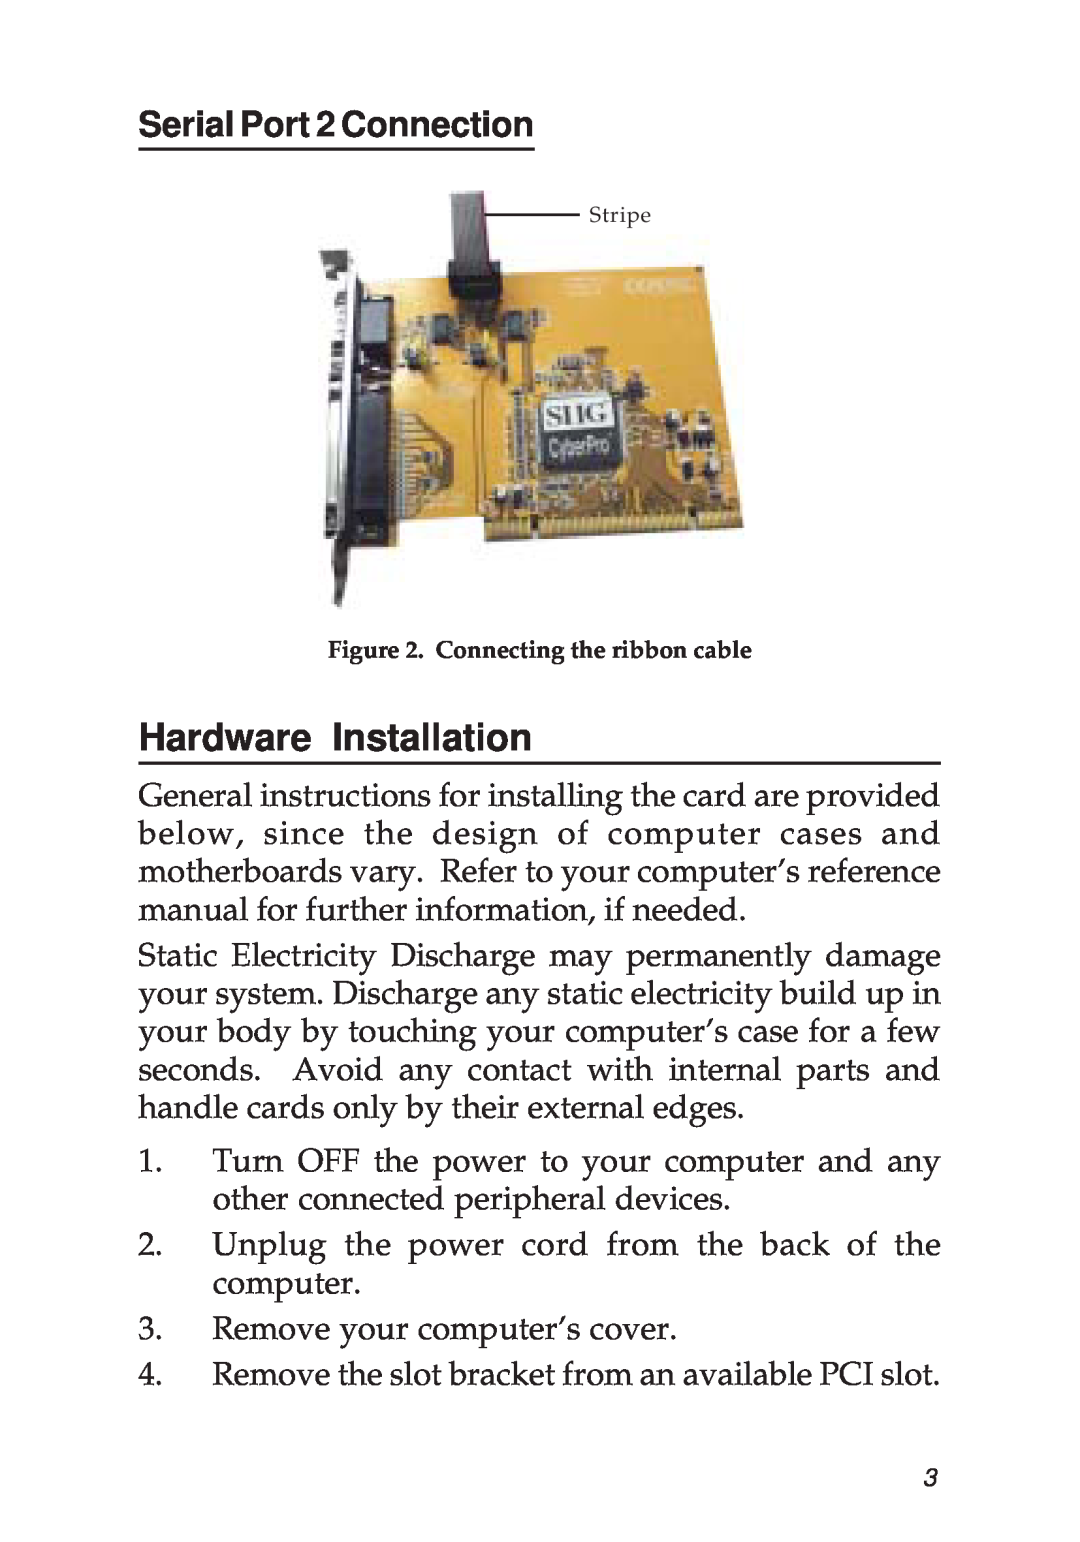 SIIG 2S1P manual Hardware Installation, Serial Port 2 Connection 